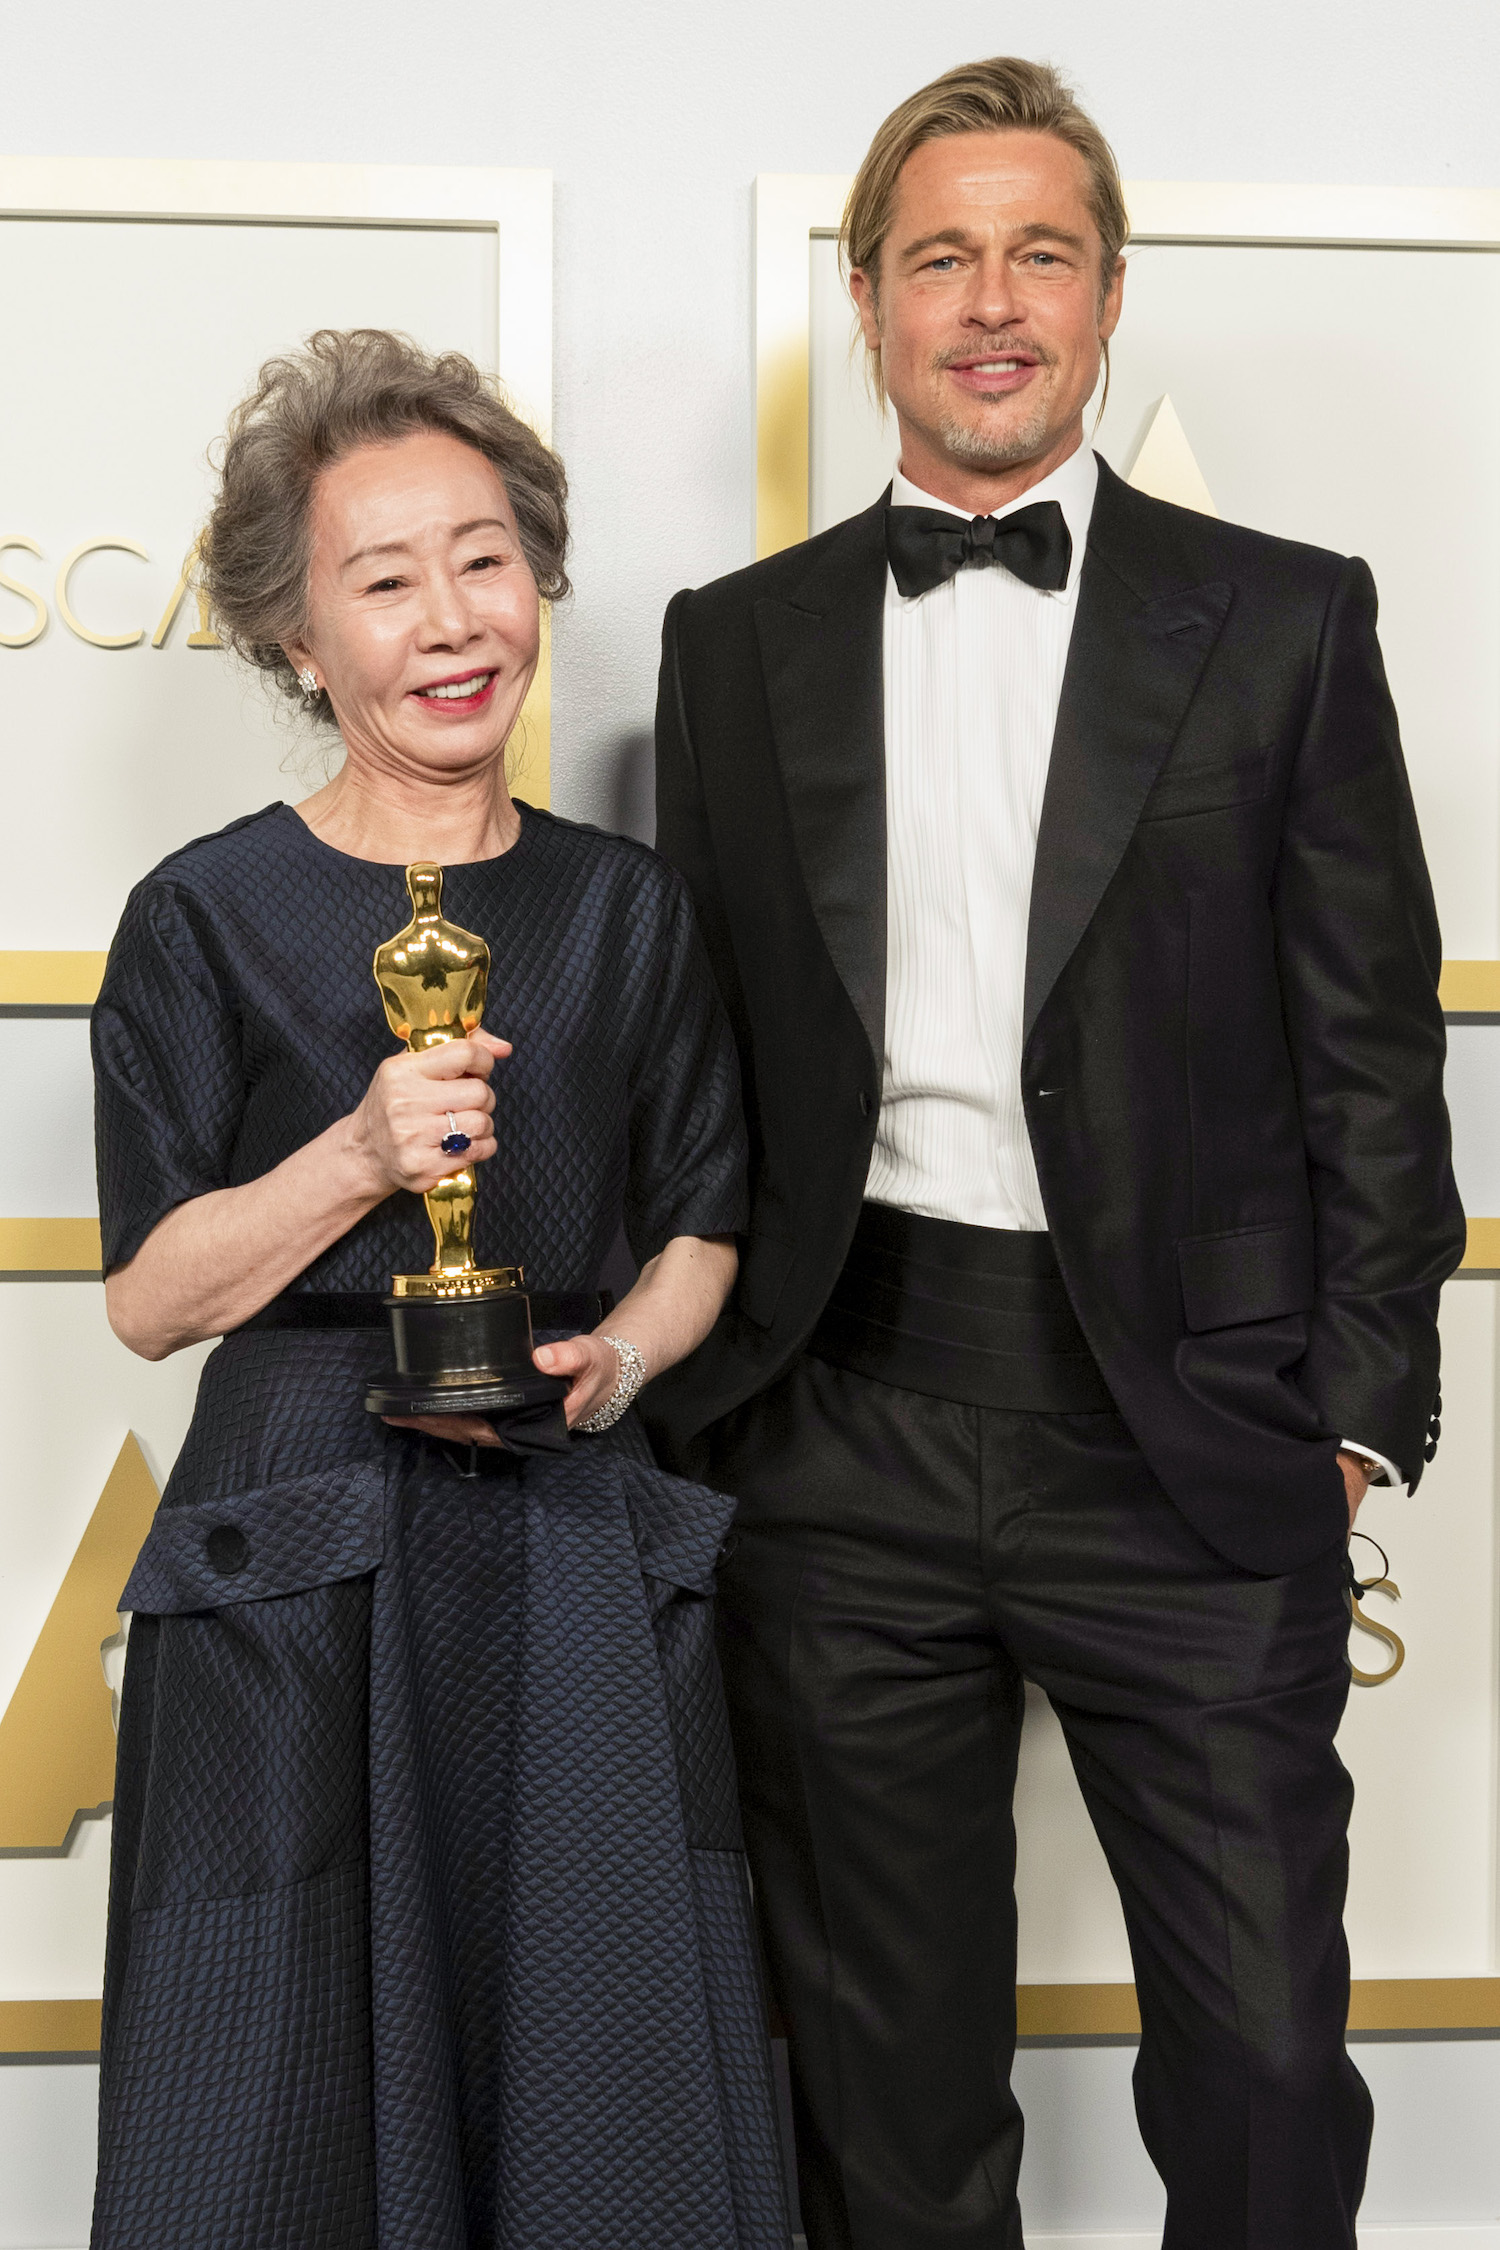 Yuh-Jung Youn poses backstage with the Oscar for Actress in a Supporting Role with Brad Pitt